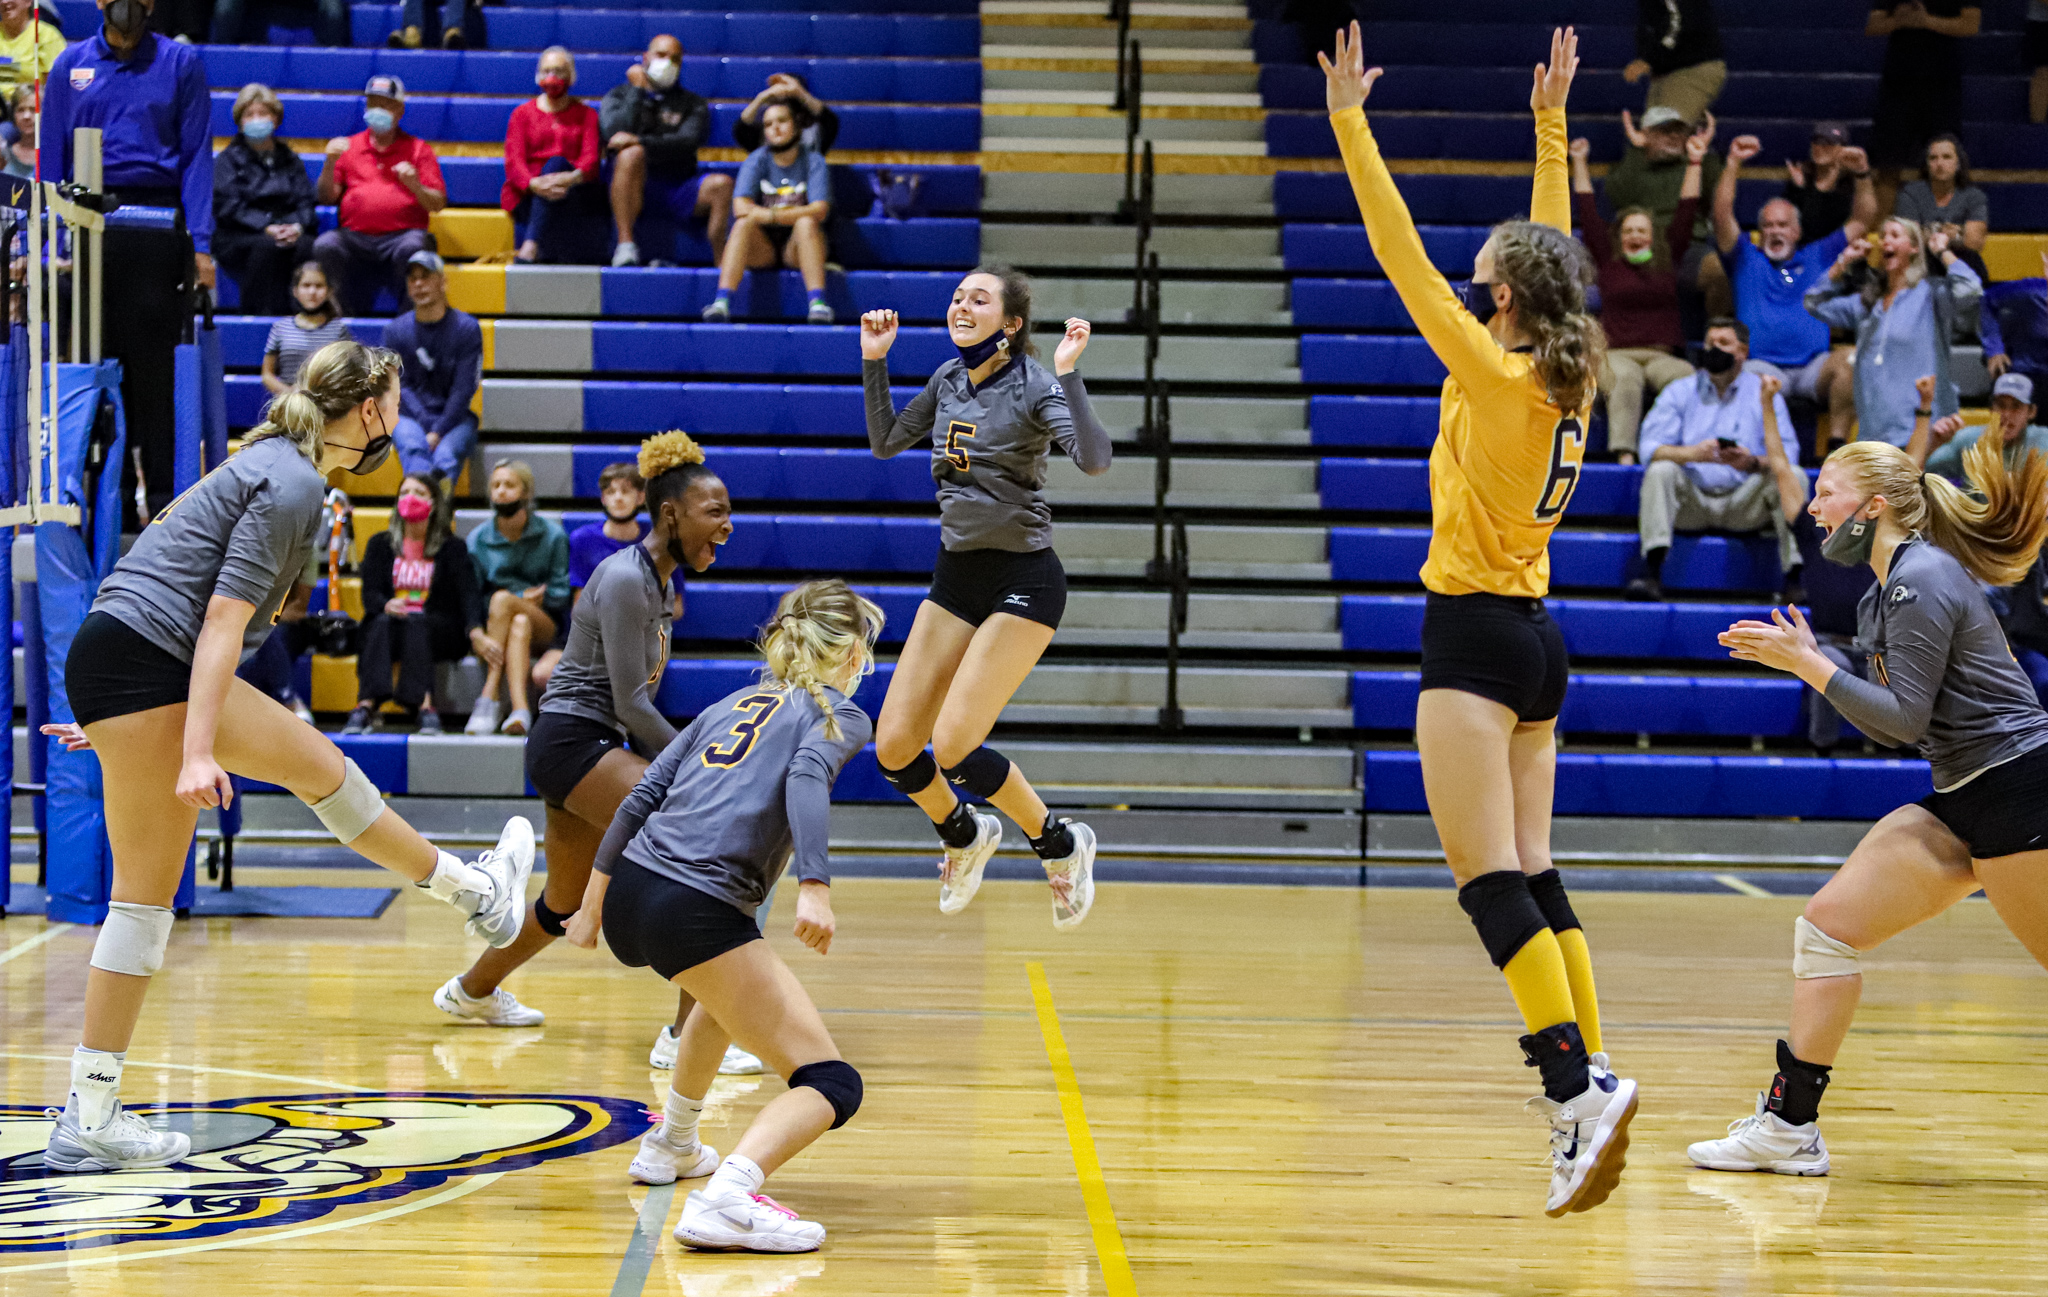 Volleyball: Goldsboro Wins Neuse Six 2A Conference Title (PHOTO GALLERY)